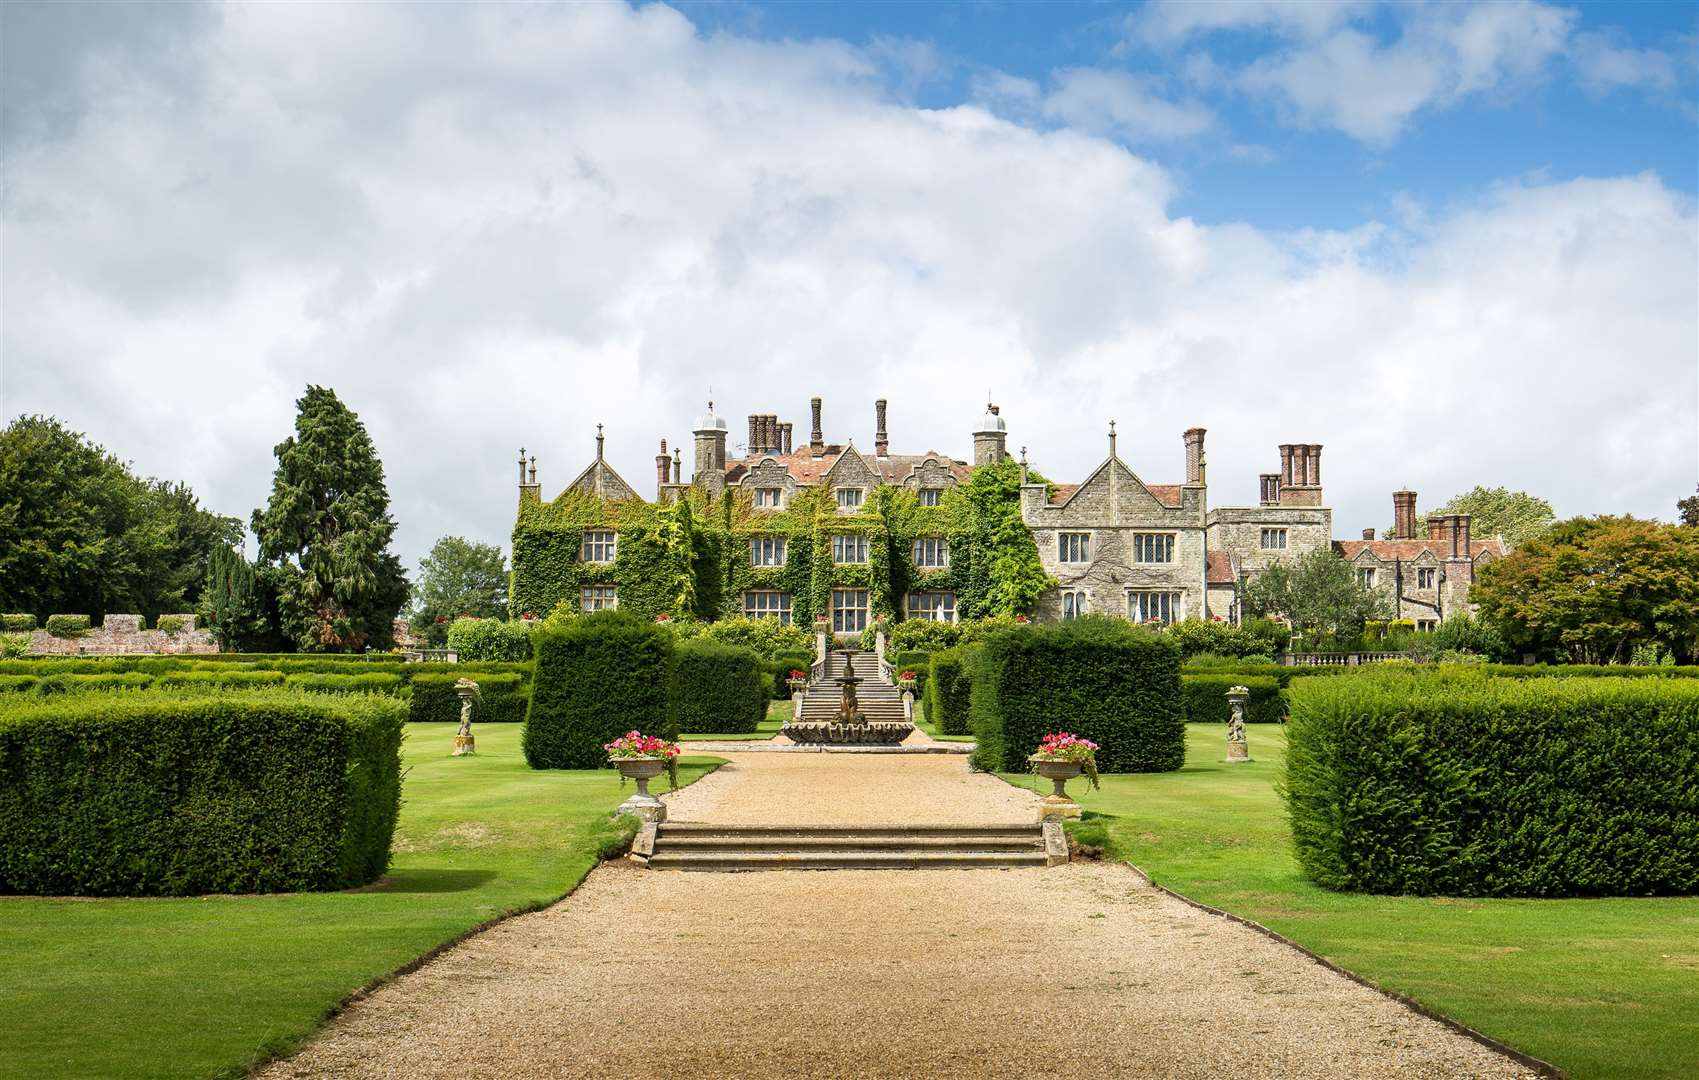 The luxurious country mansion at Eastwell Manor houses a high-end spa. near Ashford. Picture: Blueprintx